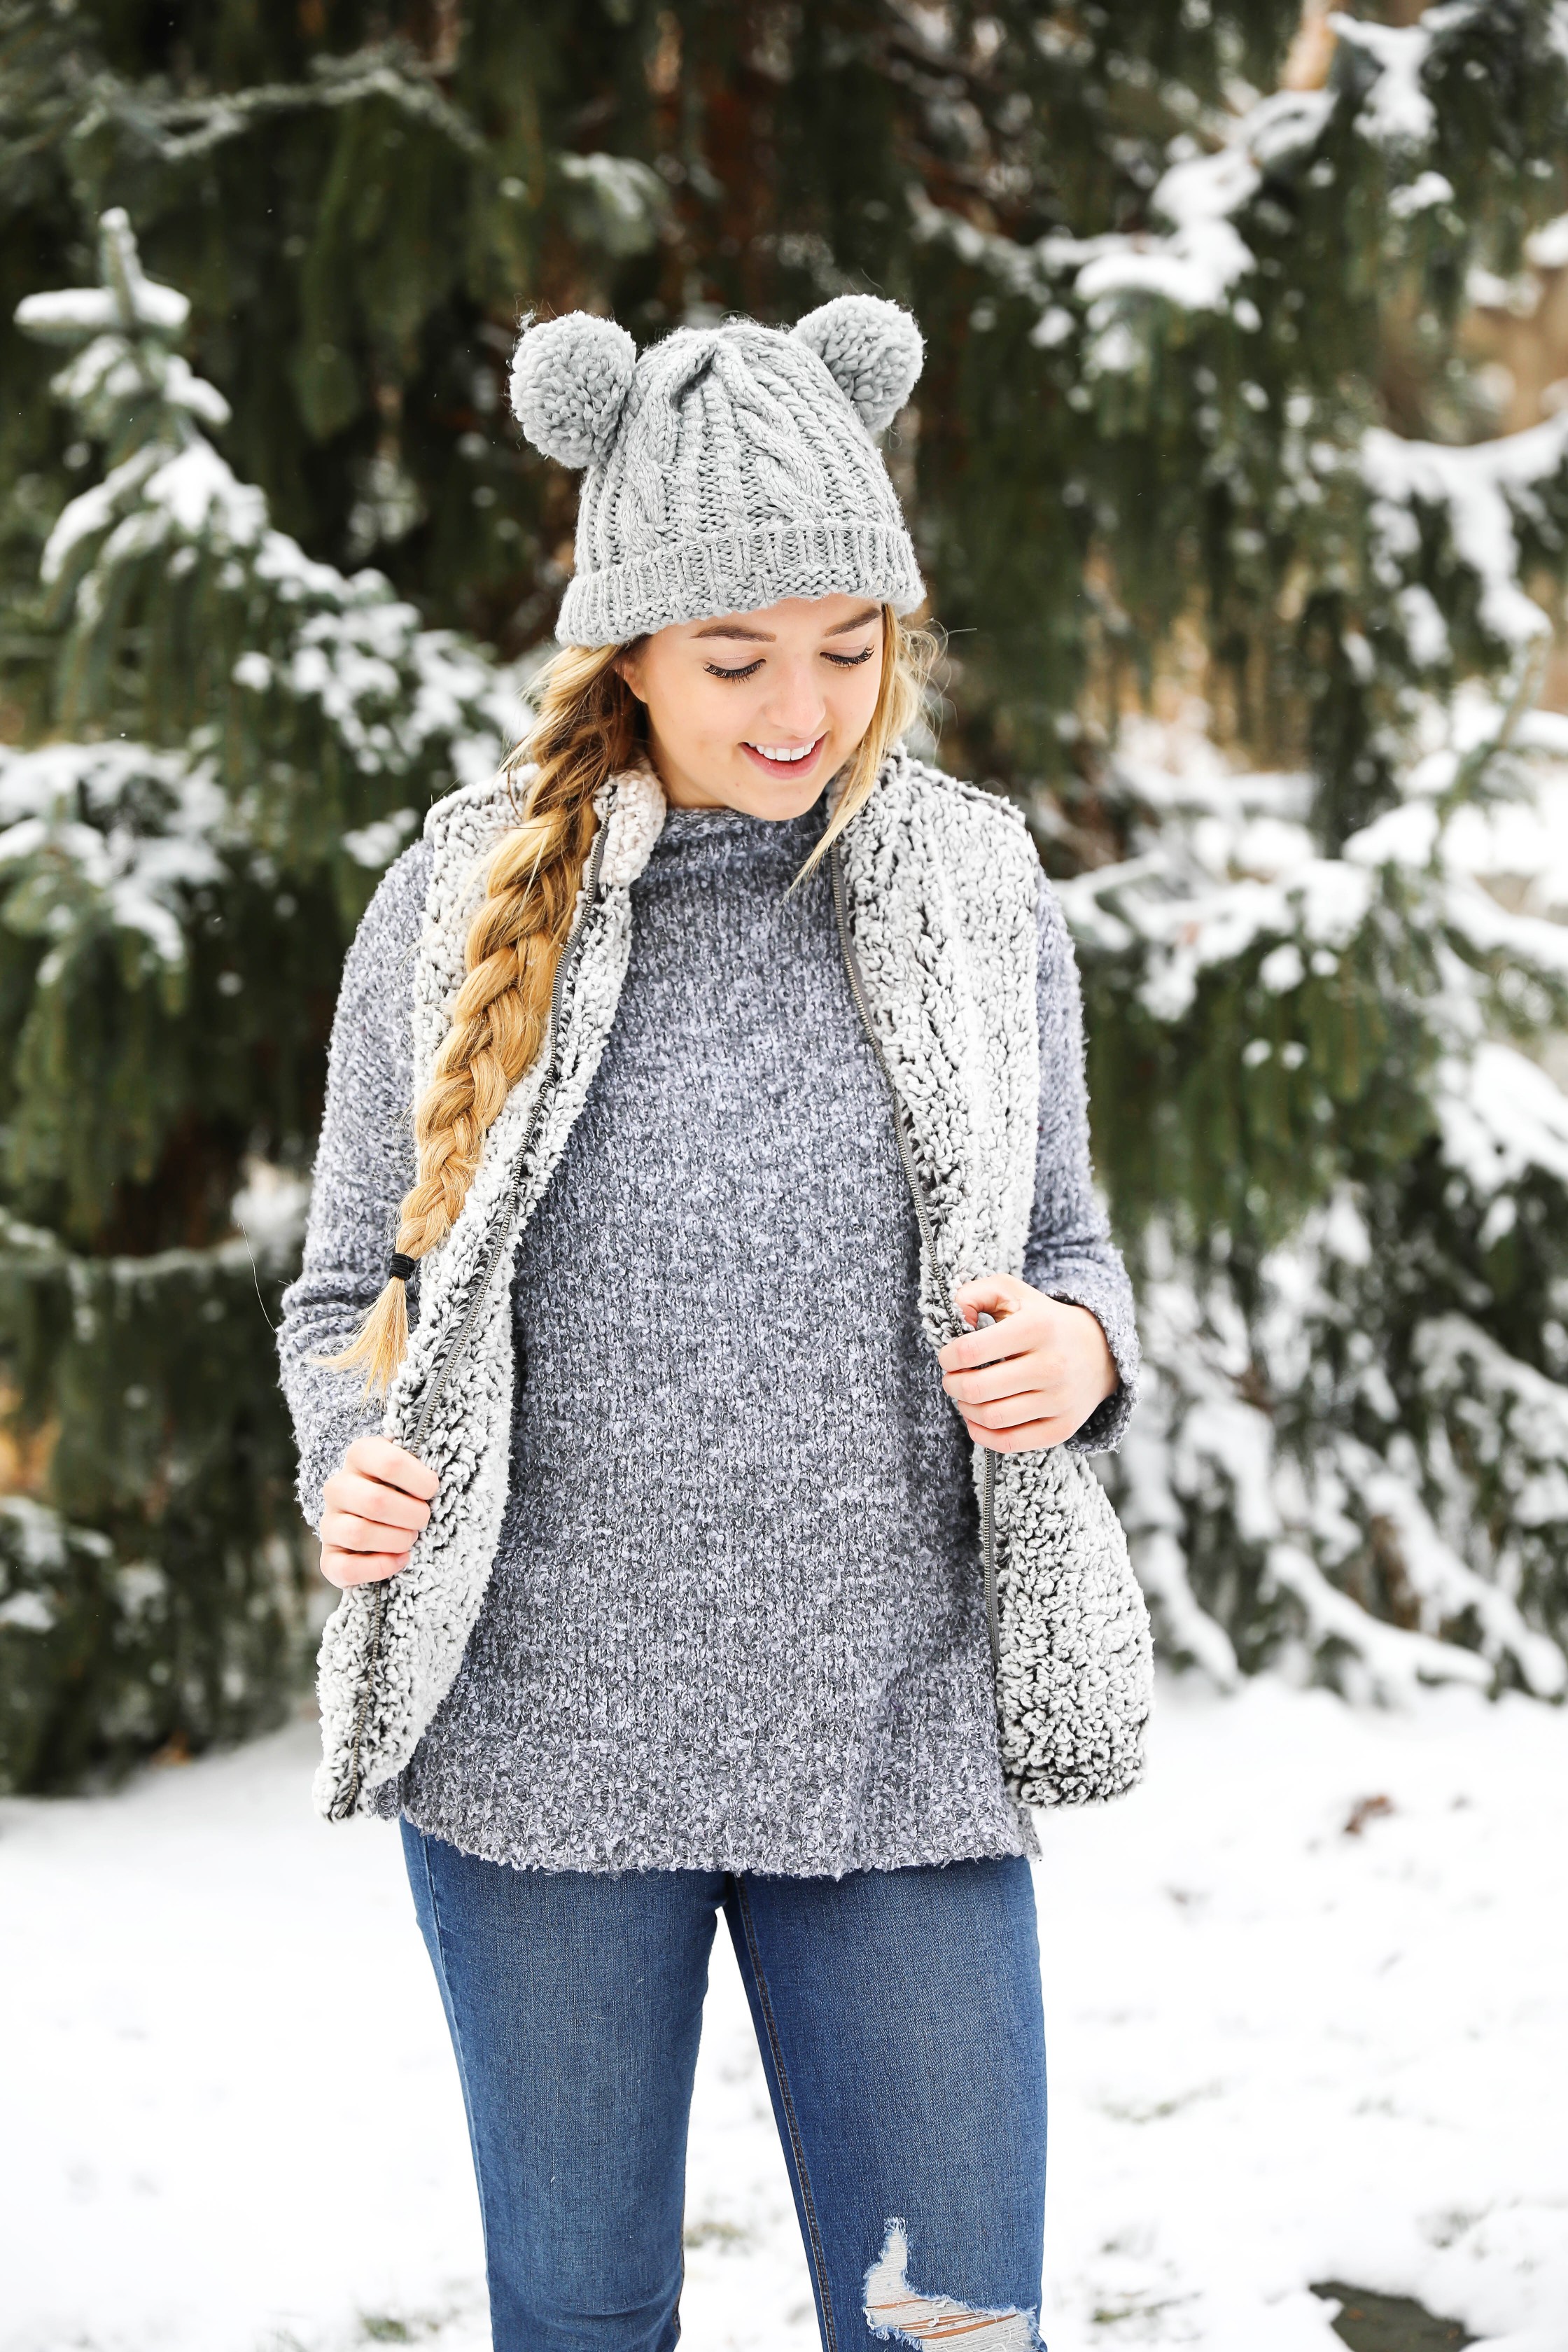 This sherpa vest is the coziest thing I own! I paired it with this soft grey sweater that has a cute turtleneck. I am also wearing my grey pom pom beanie! It has two pom poms which is super cute! I love this winter outfit! Details on fashion blog daily dose of charm by lauren lindmark